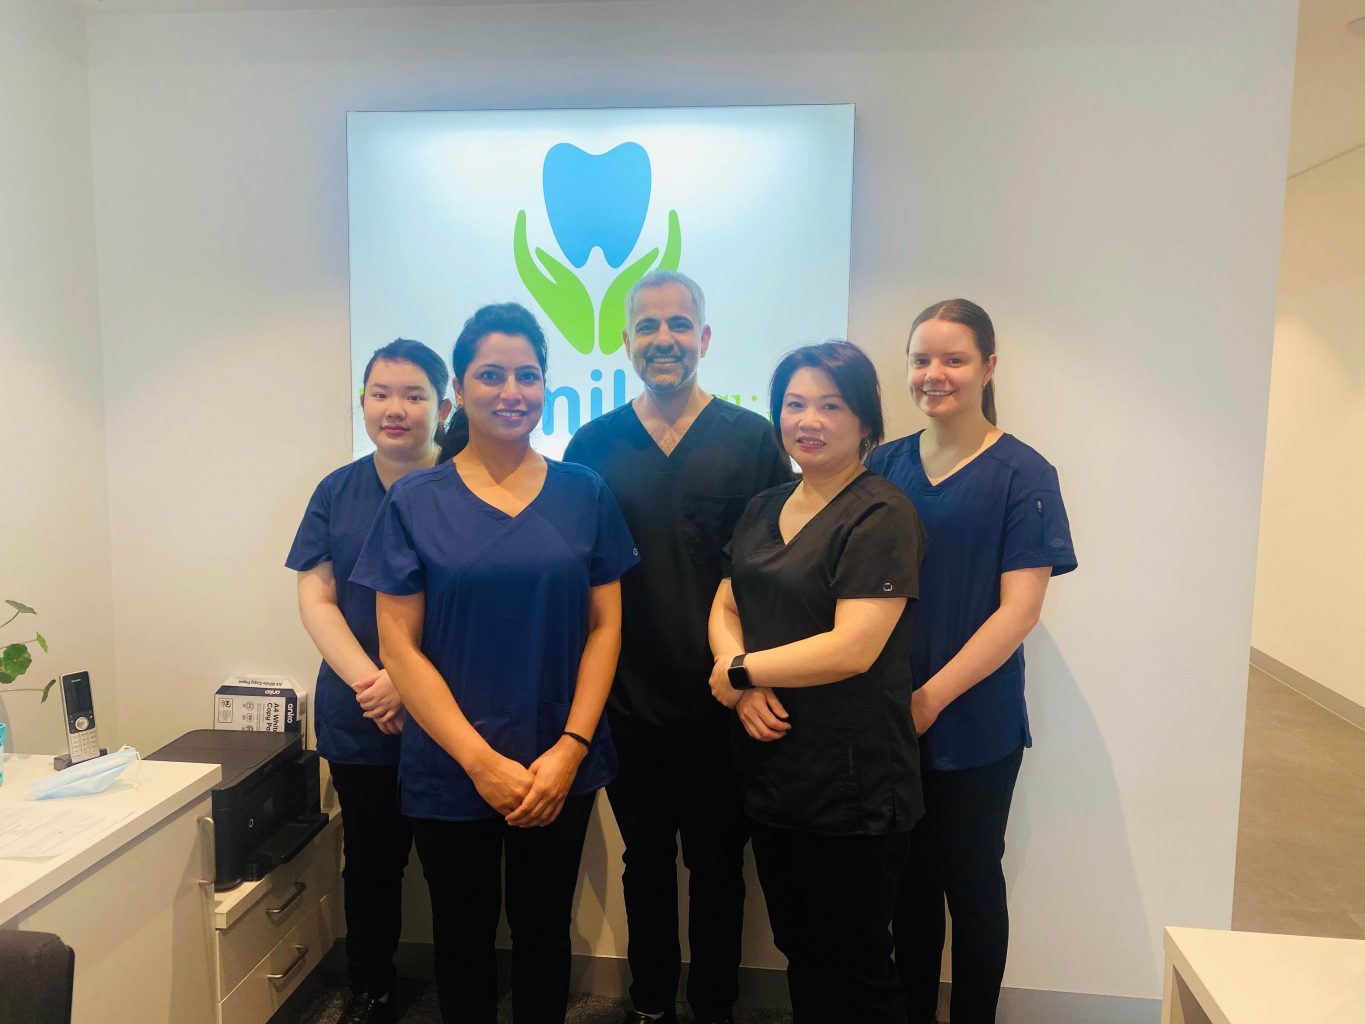 The smile clinic team